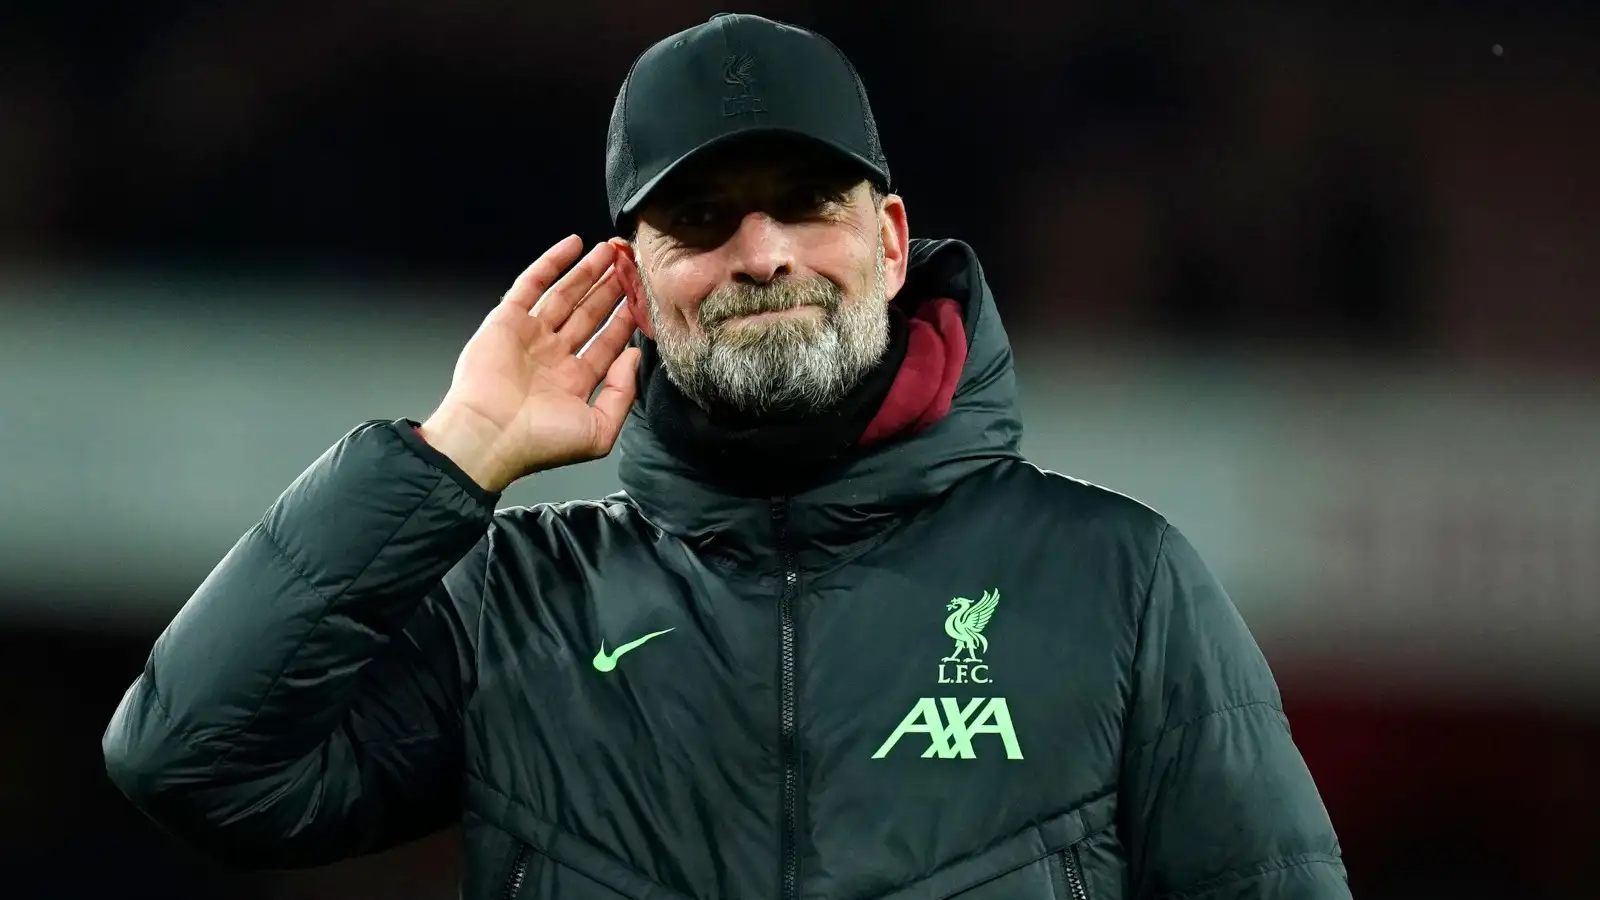 Jurgen Klopp gestures to Liverpool adherents after the win over Arsenal.